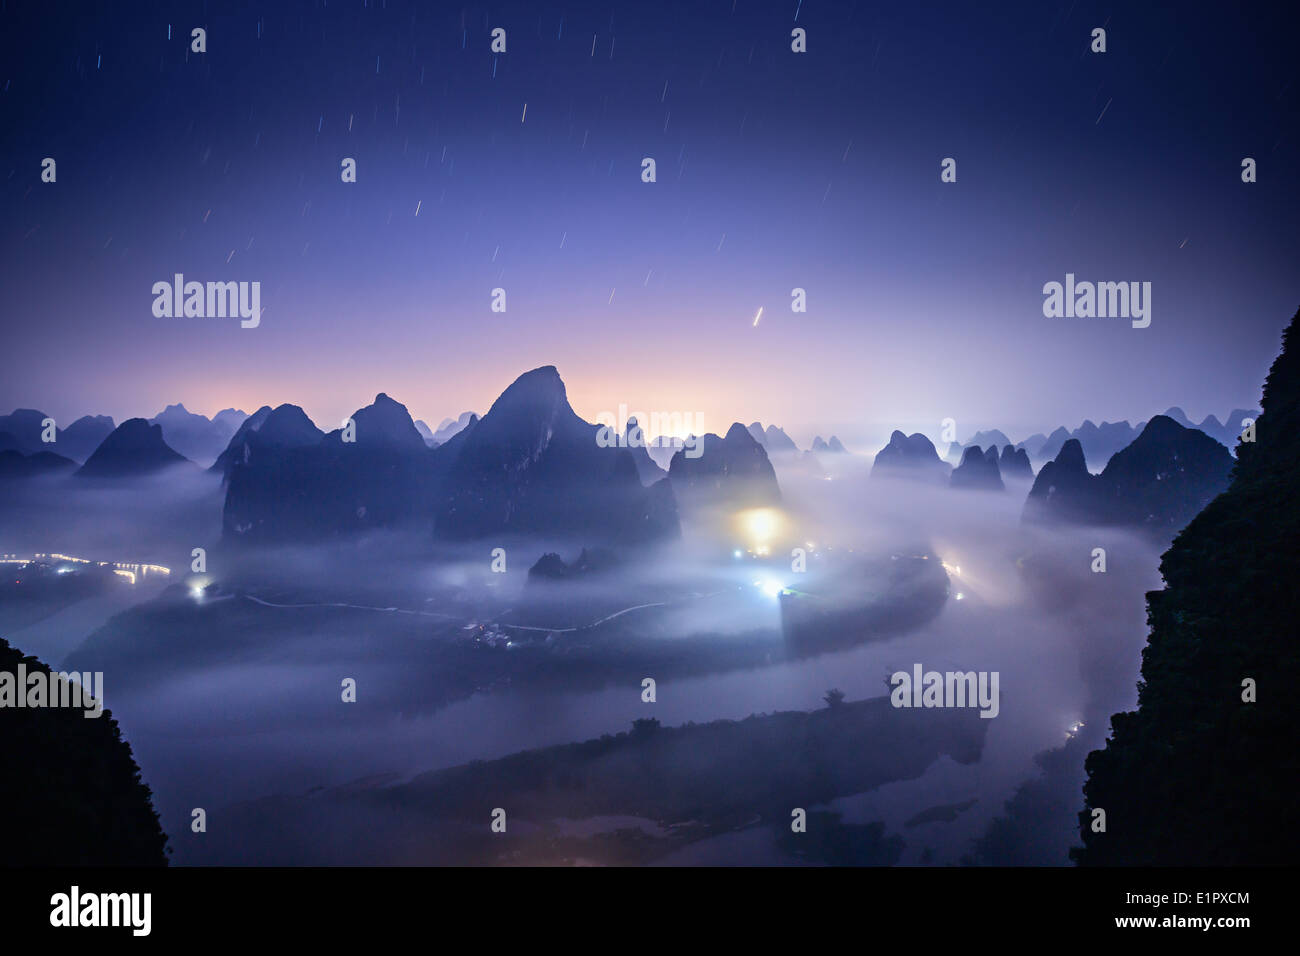 Karst mountain landscape on the Li River in Xingping, Guangxi Province, China. Stock Photo